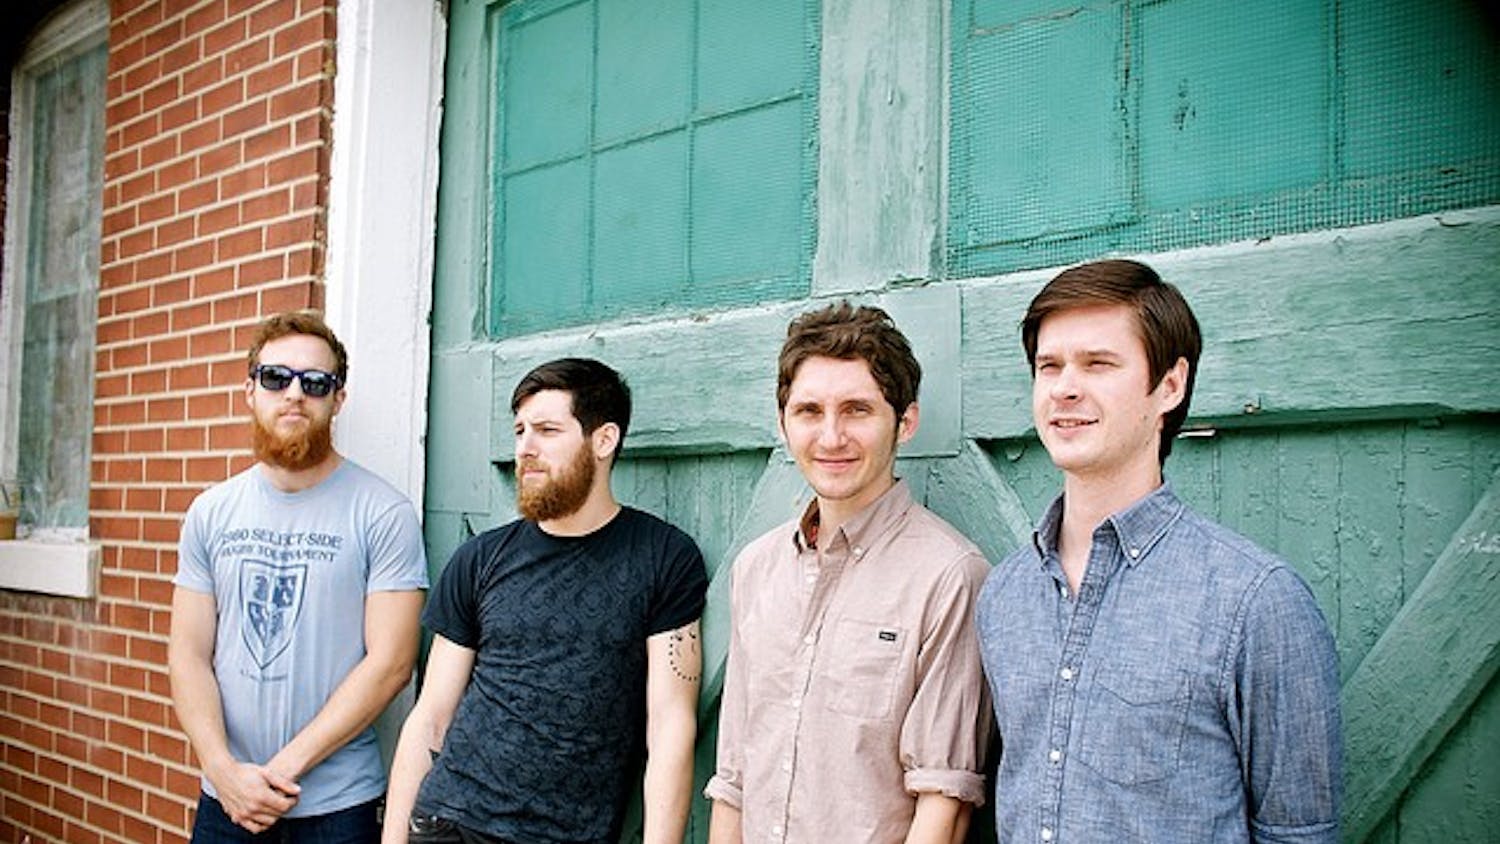 	Electro-pop band Vacationer is set to headline the 10-artist lineup for the WUSC Jamboree 2014 Saturday at El Burrito.